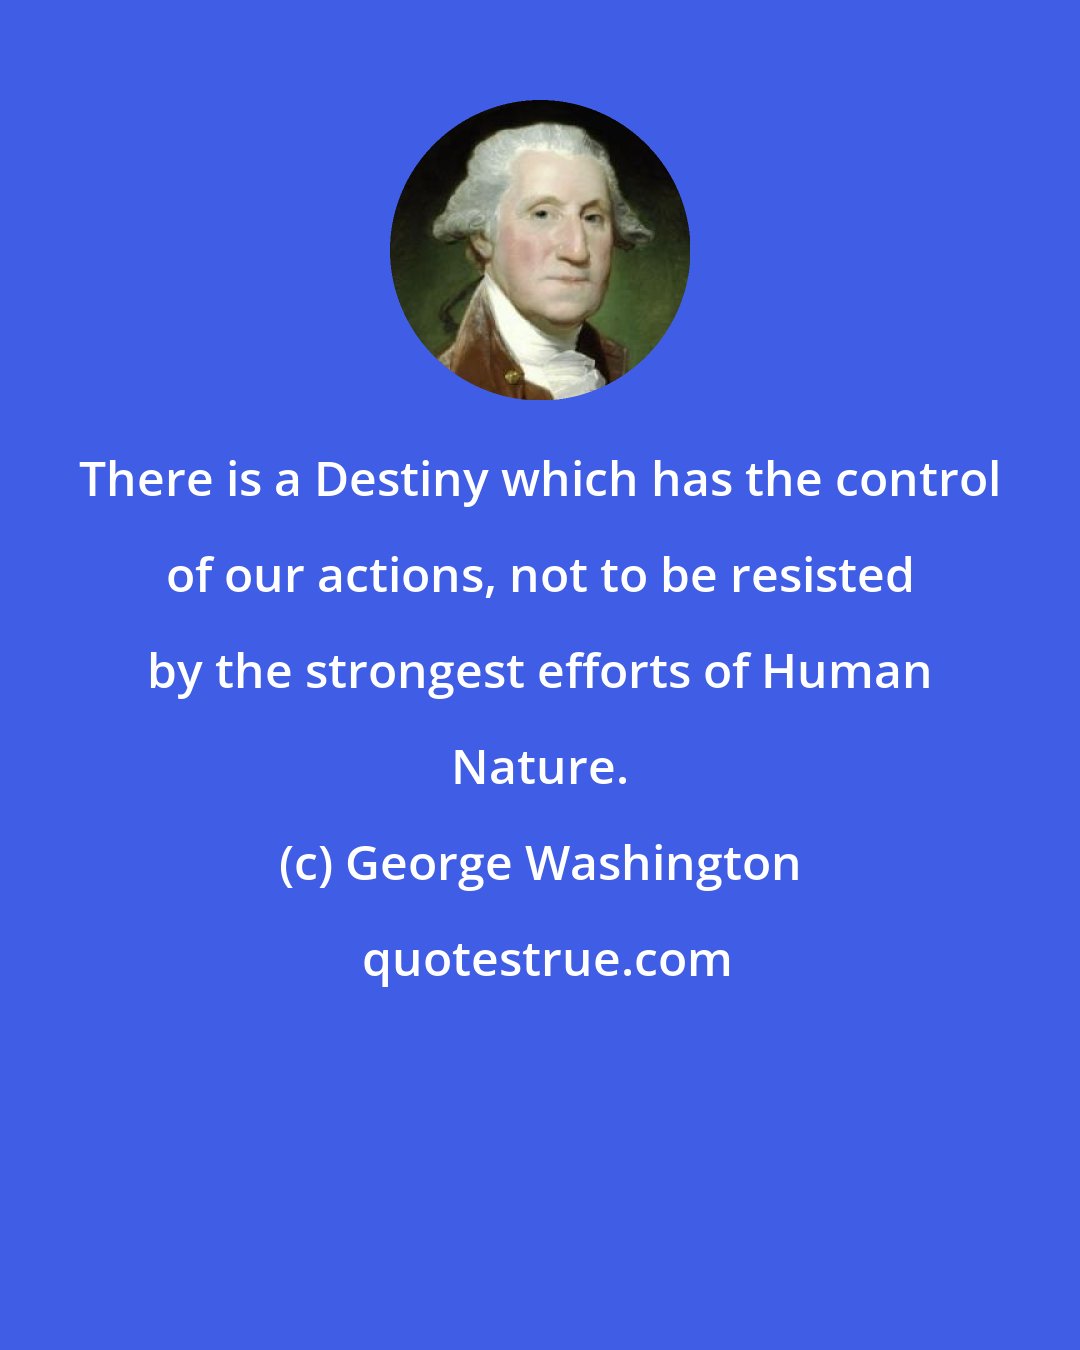 George Washington: There is a Destiny which has the control of our actions, not to be resisted by the strongest efforts of Human Nature.